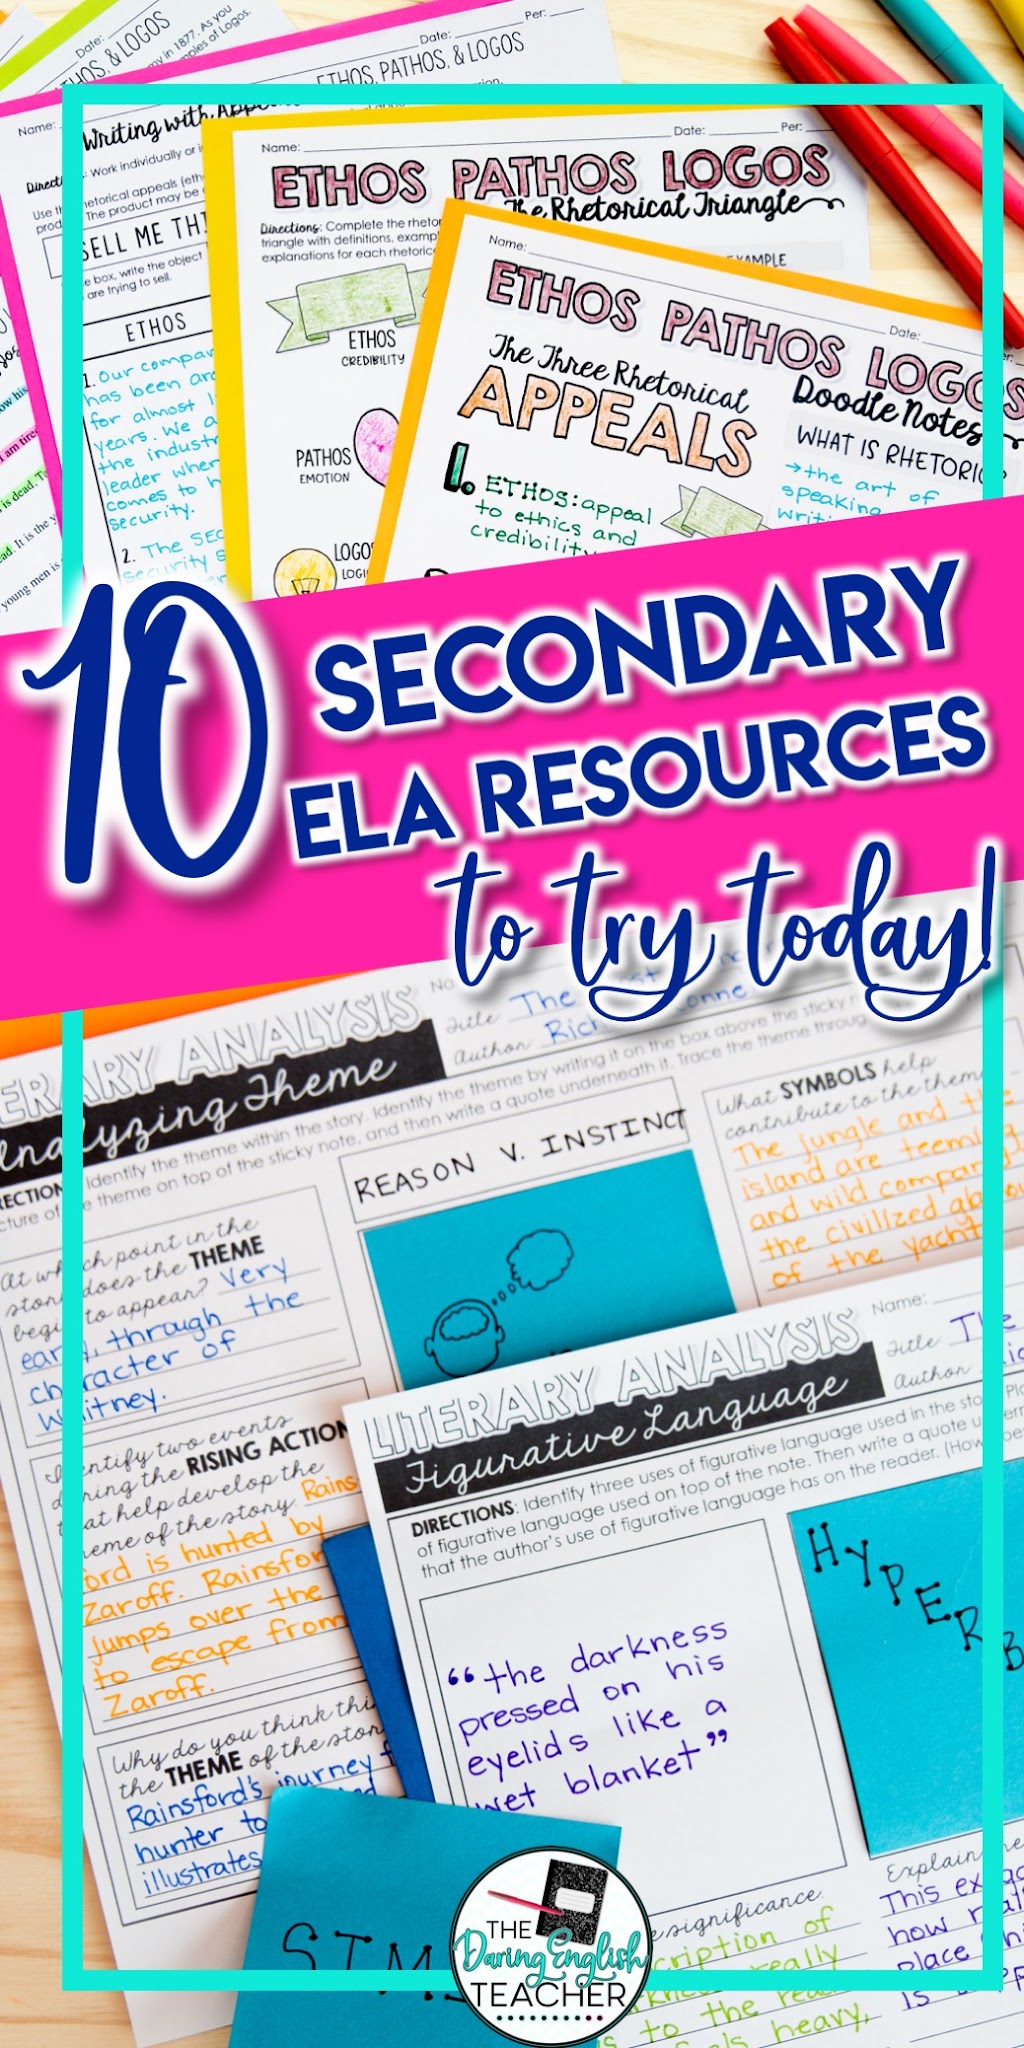 10 Secondary ELA Lessons for Your Classroom